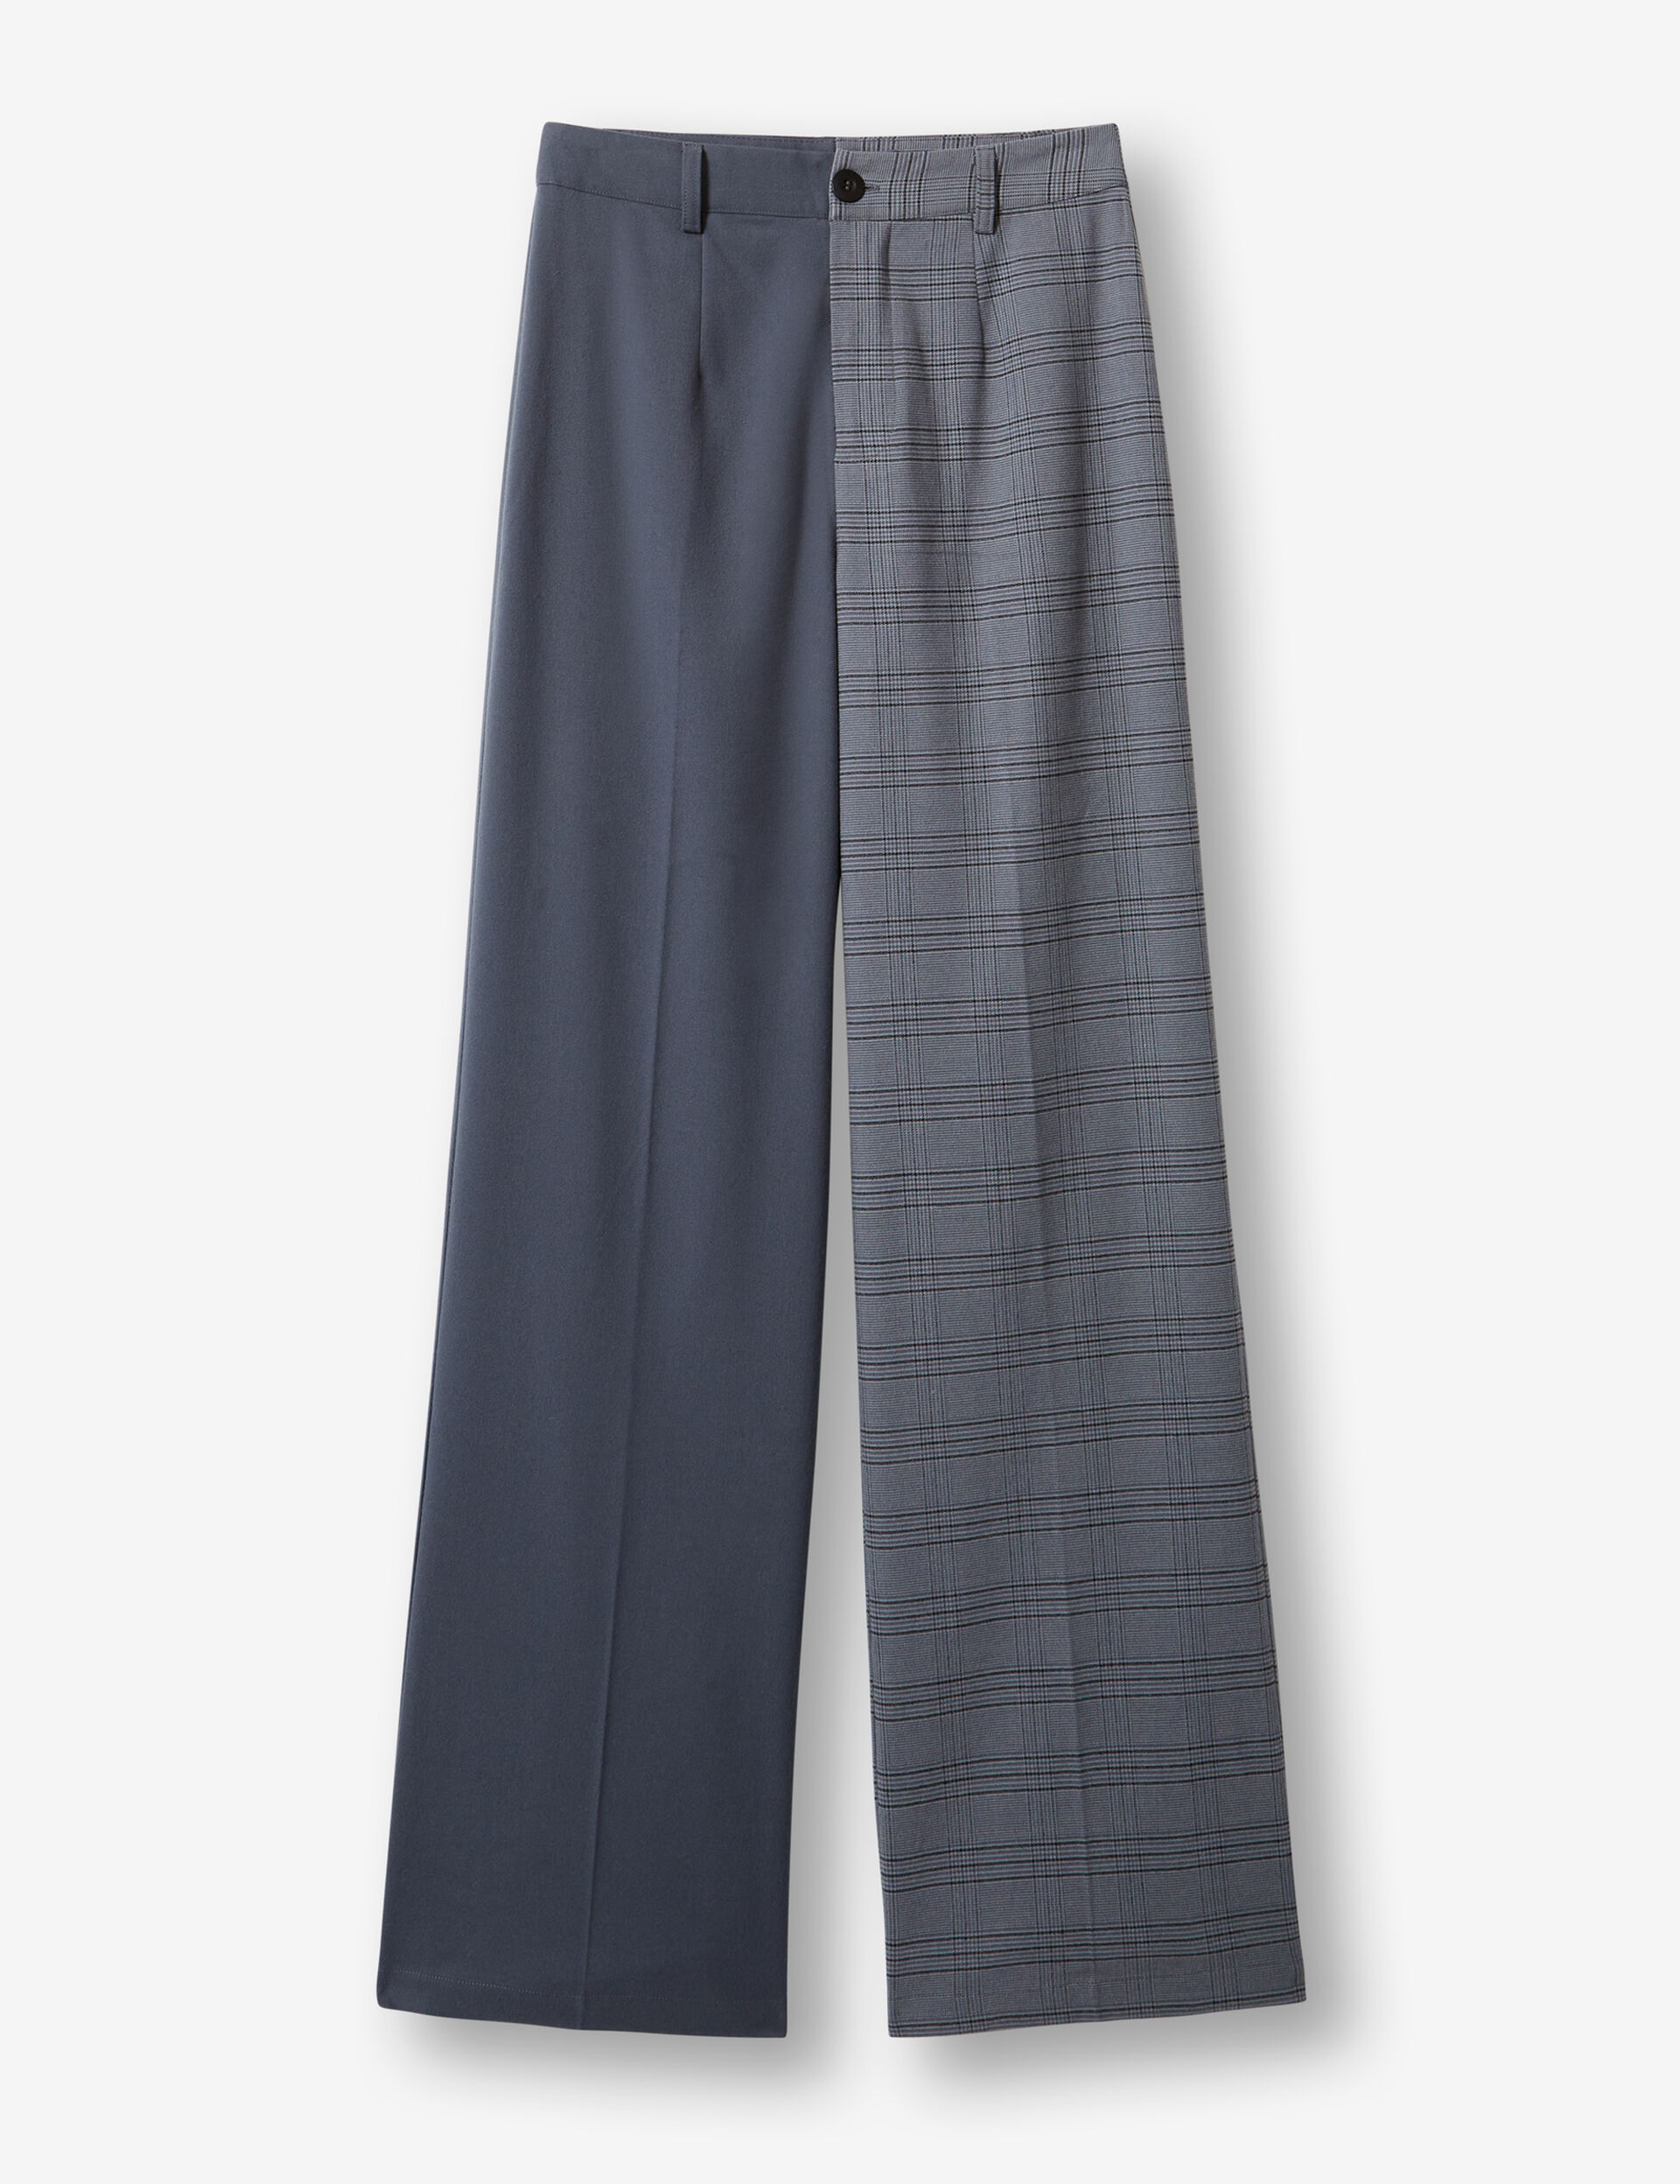 Patterned and plain palazzo trousers